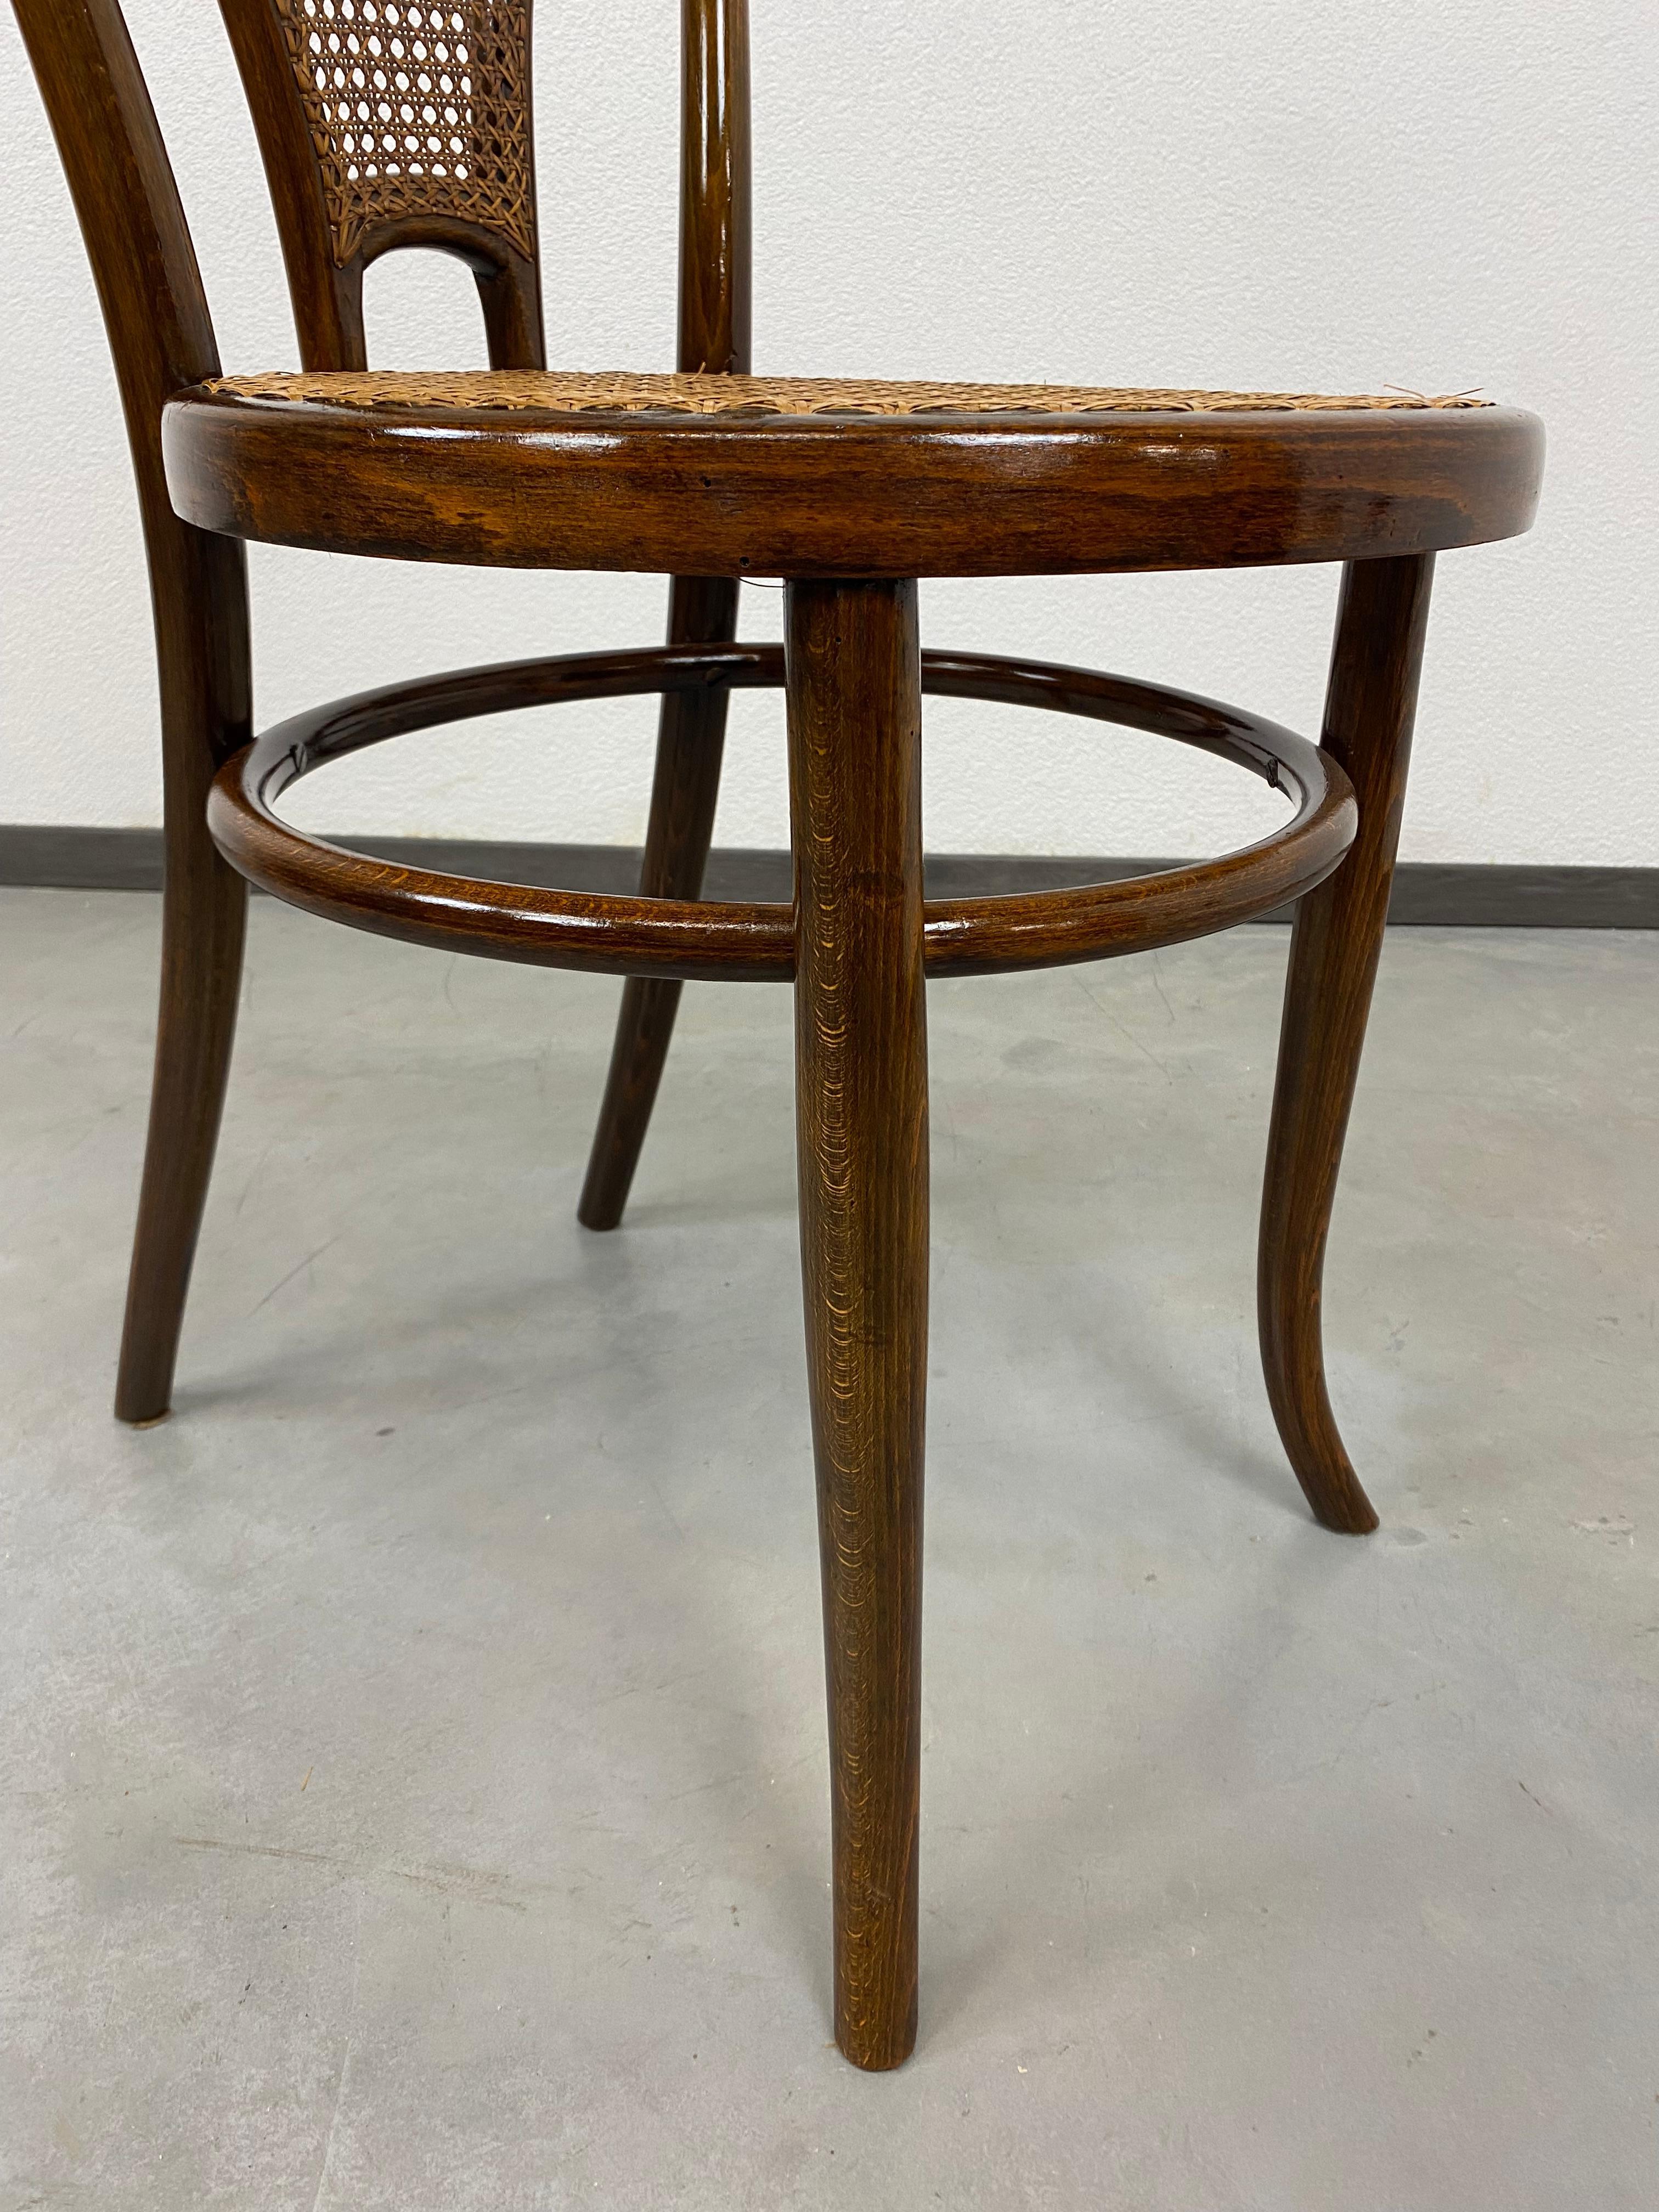 Vienna Secession Fischel Dining Chair No.42 For Sale